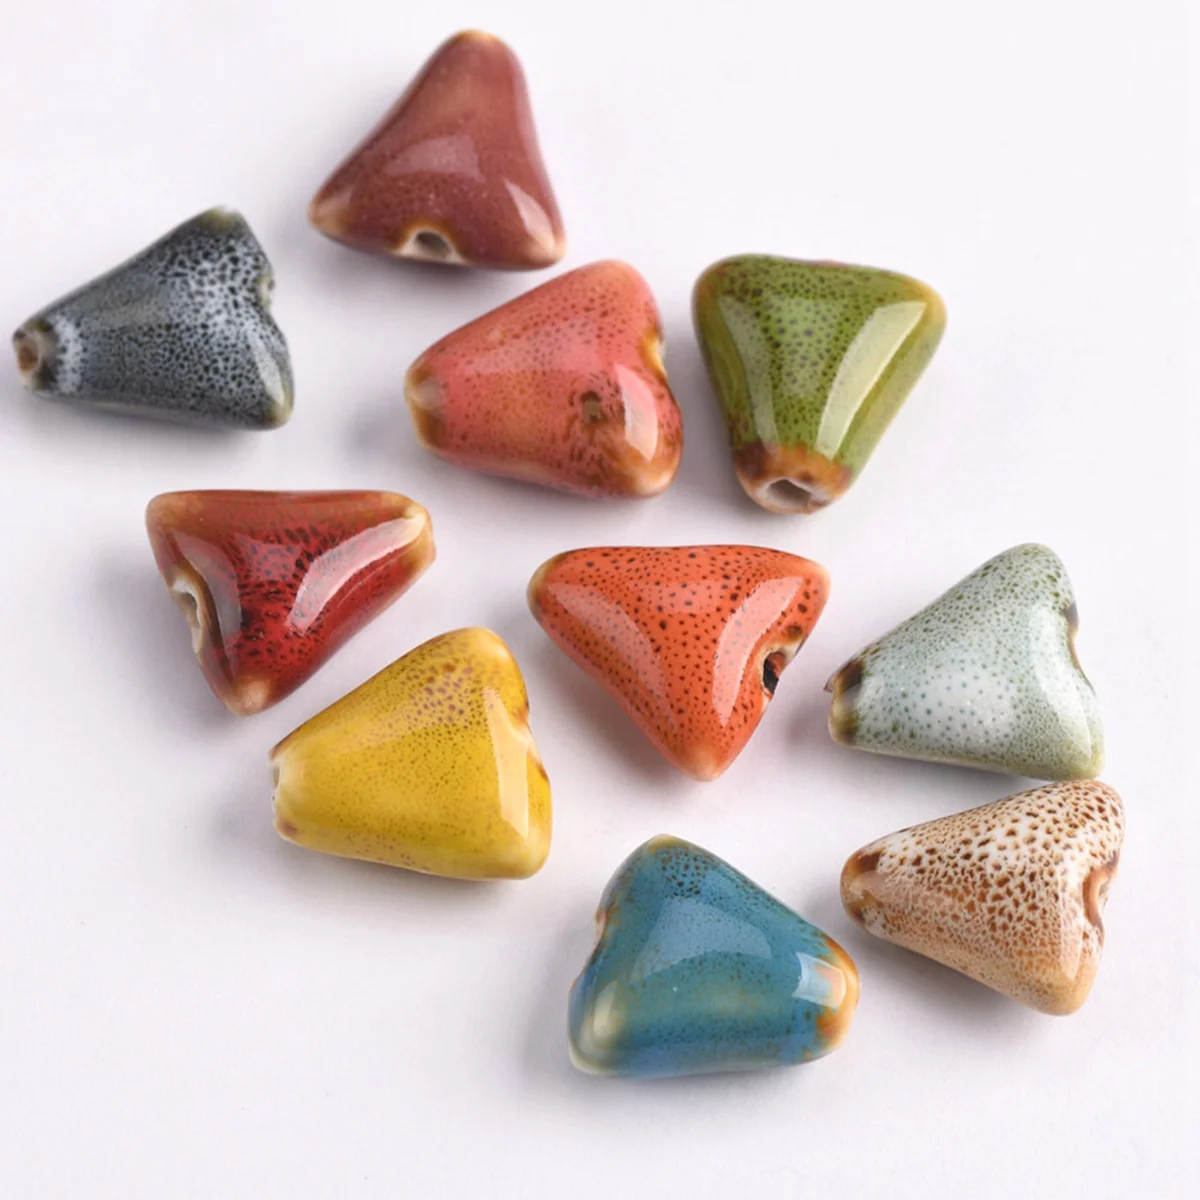 

10pcs Triangle Shape 16mm Handmade Ceramic Porcelain Loose Spacer Beads Lot for Jewelry Making DIY Crafts Findings